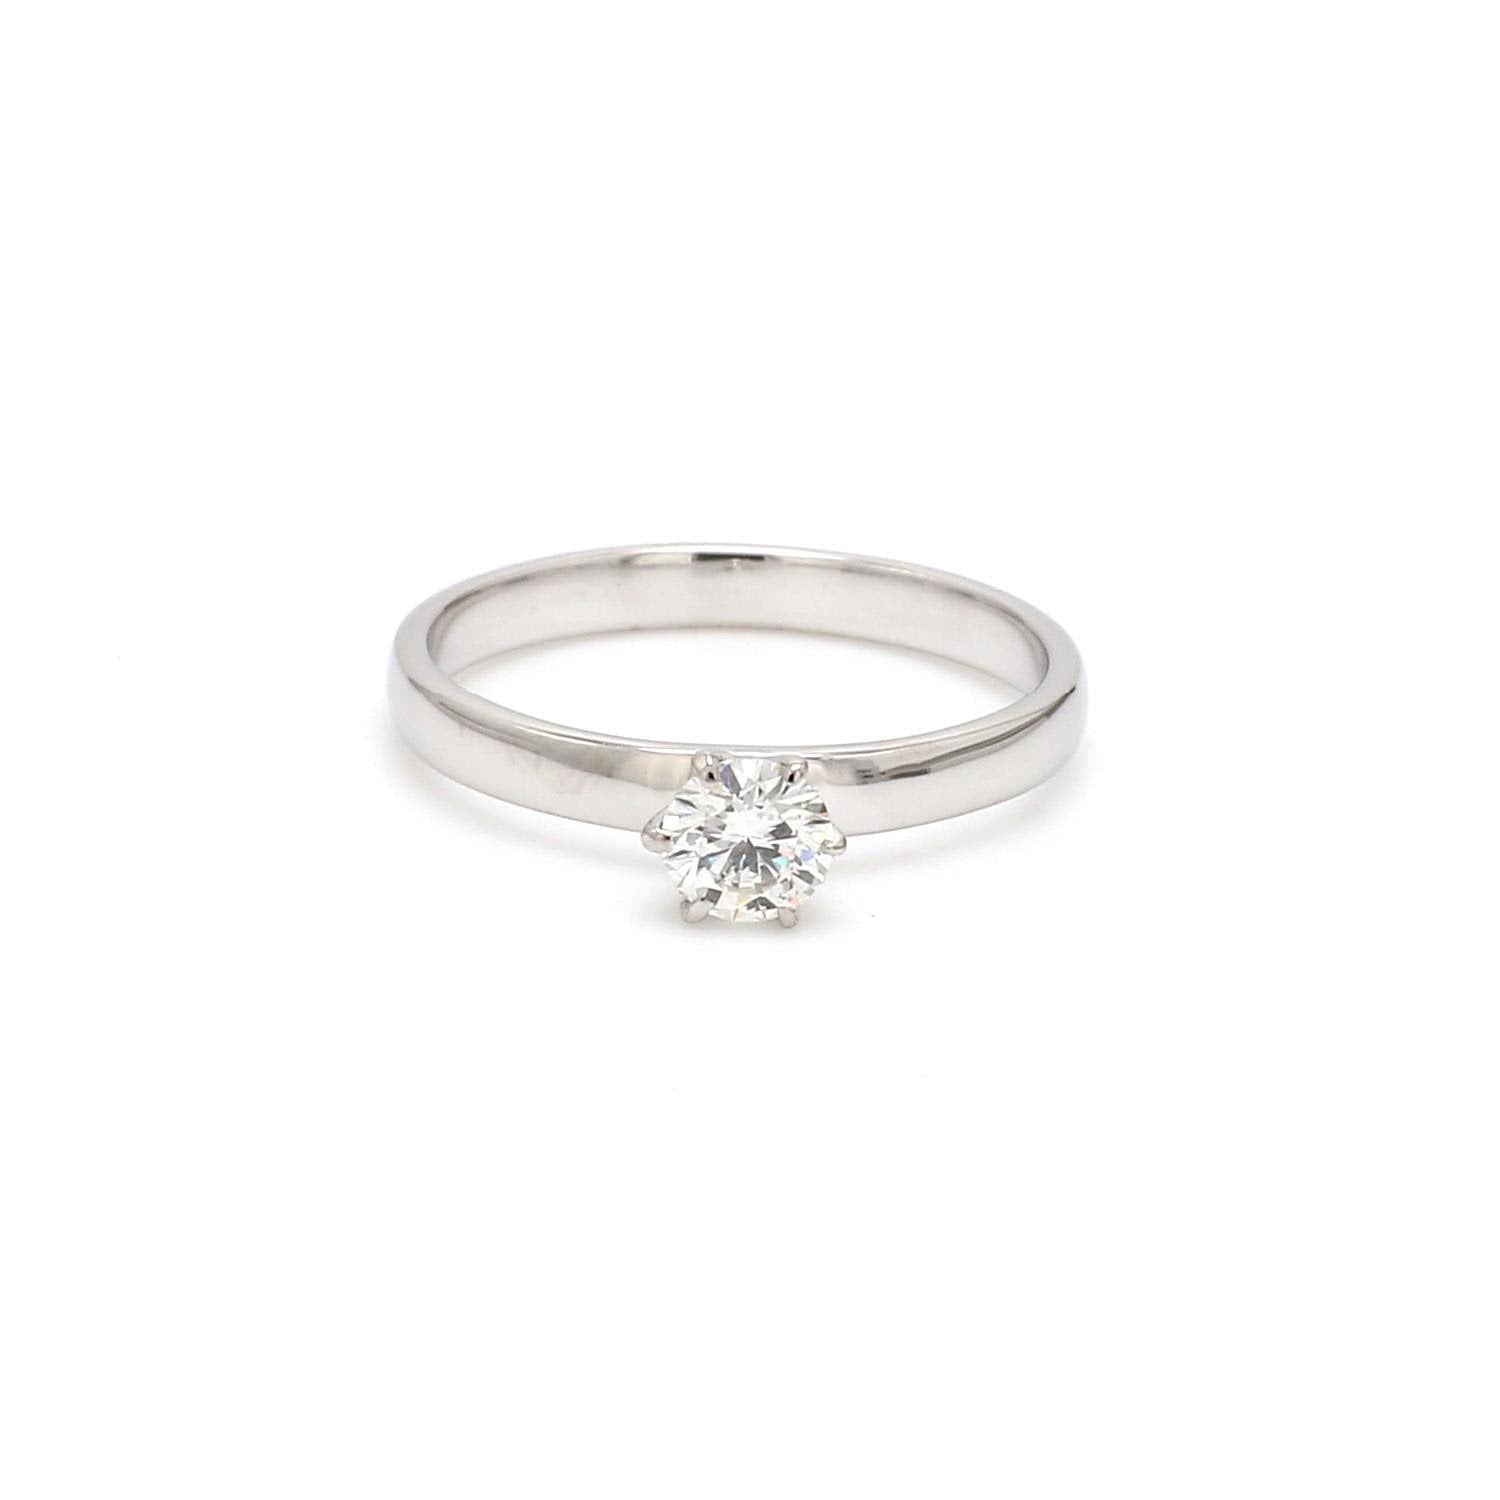 20 Pointer Classic 6 Prong Solitaire Ring made in Platinum SKU 0012-A